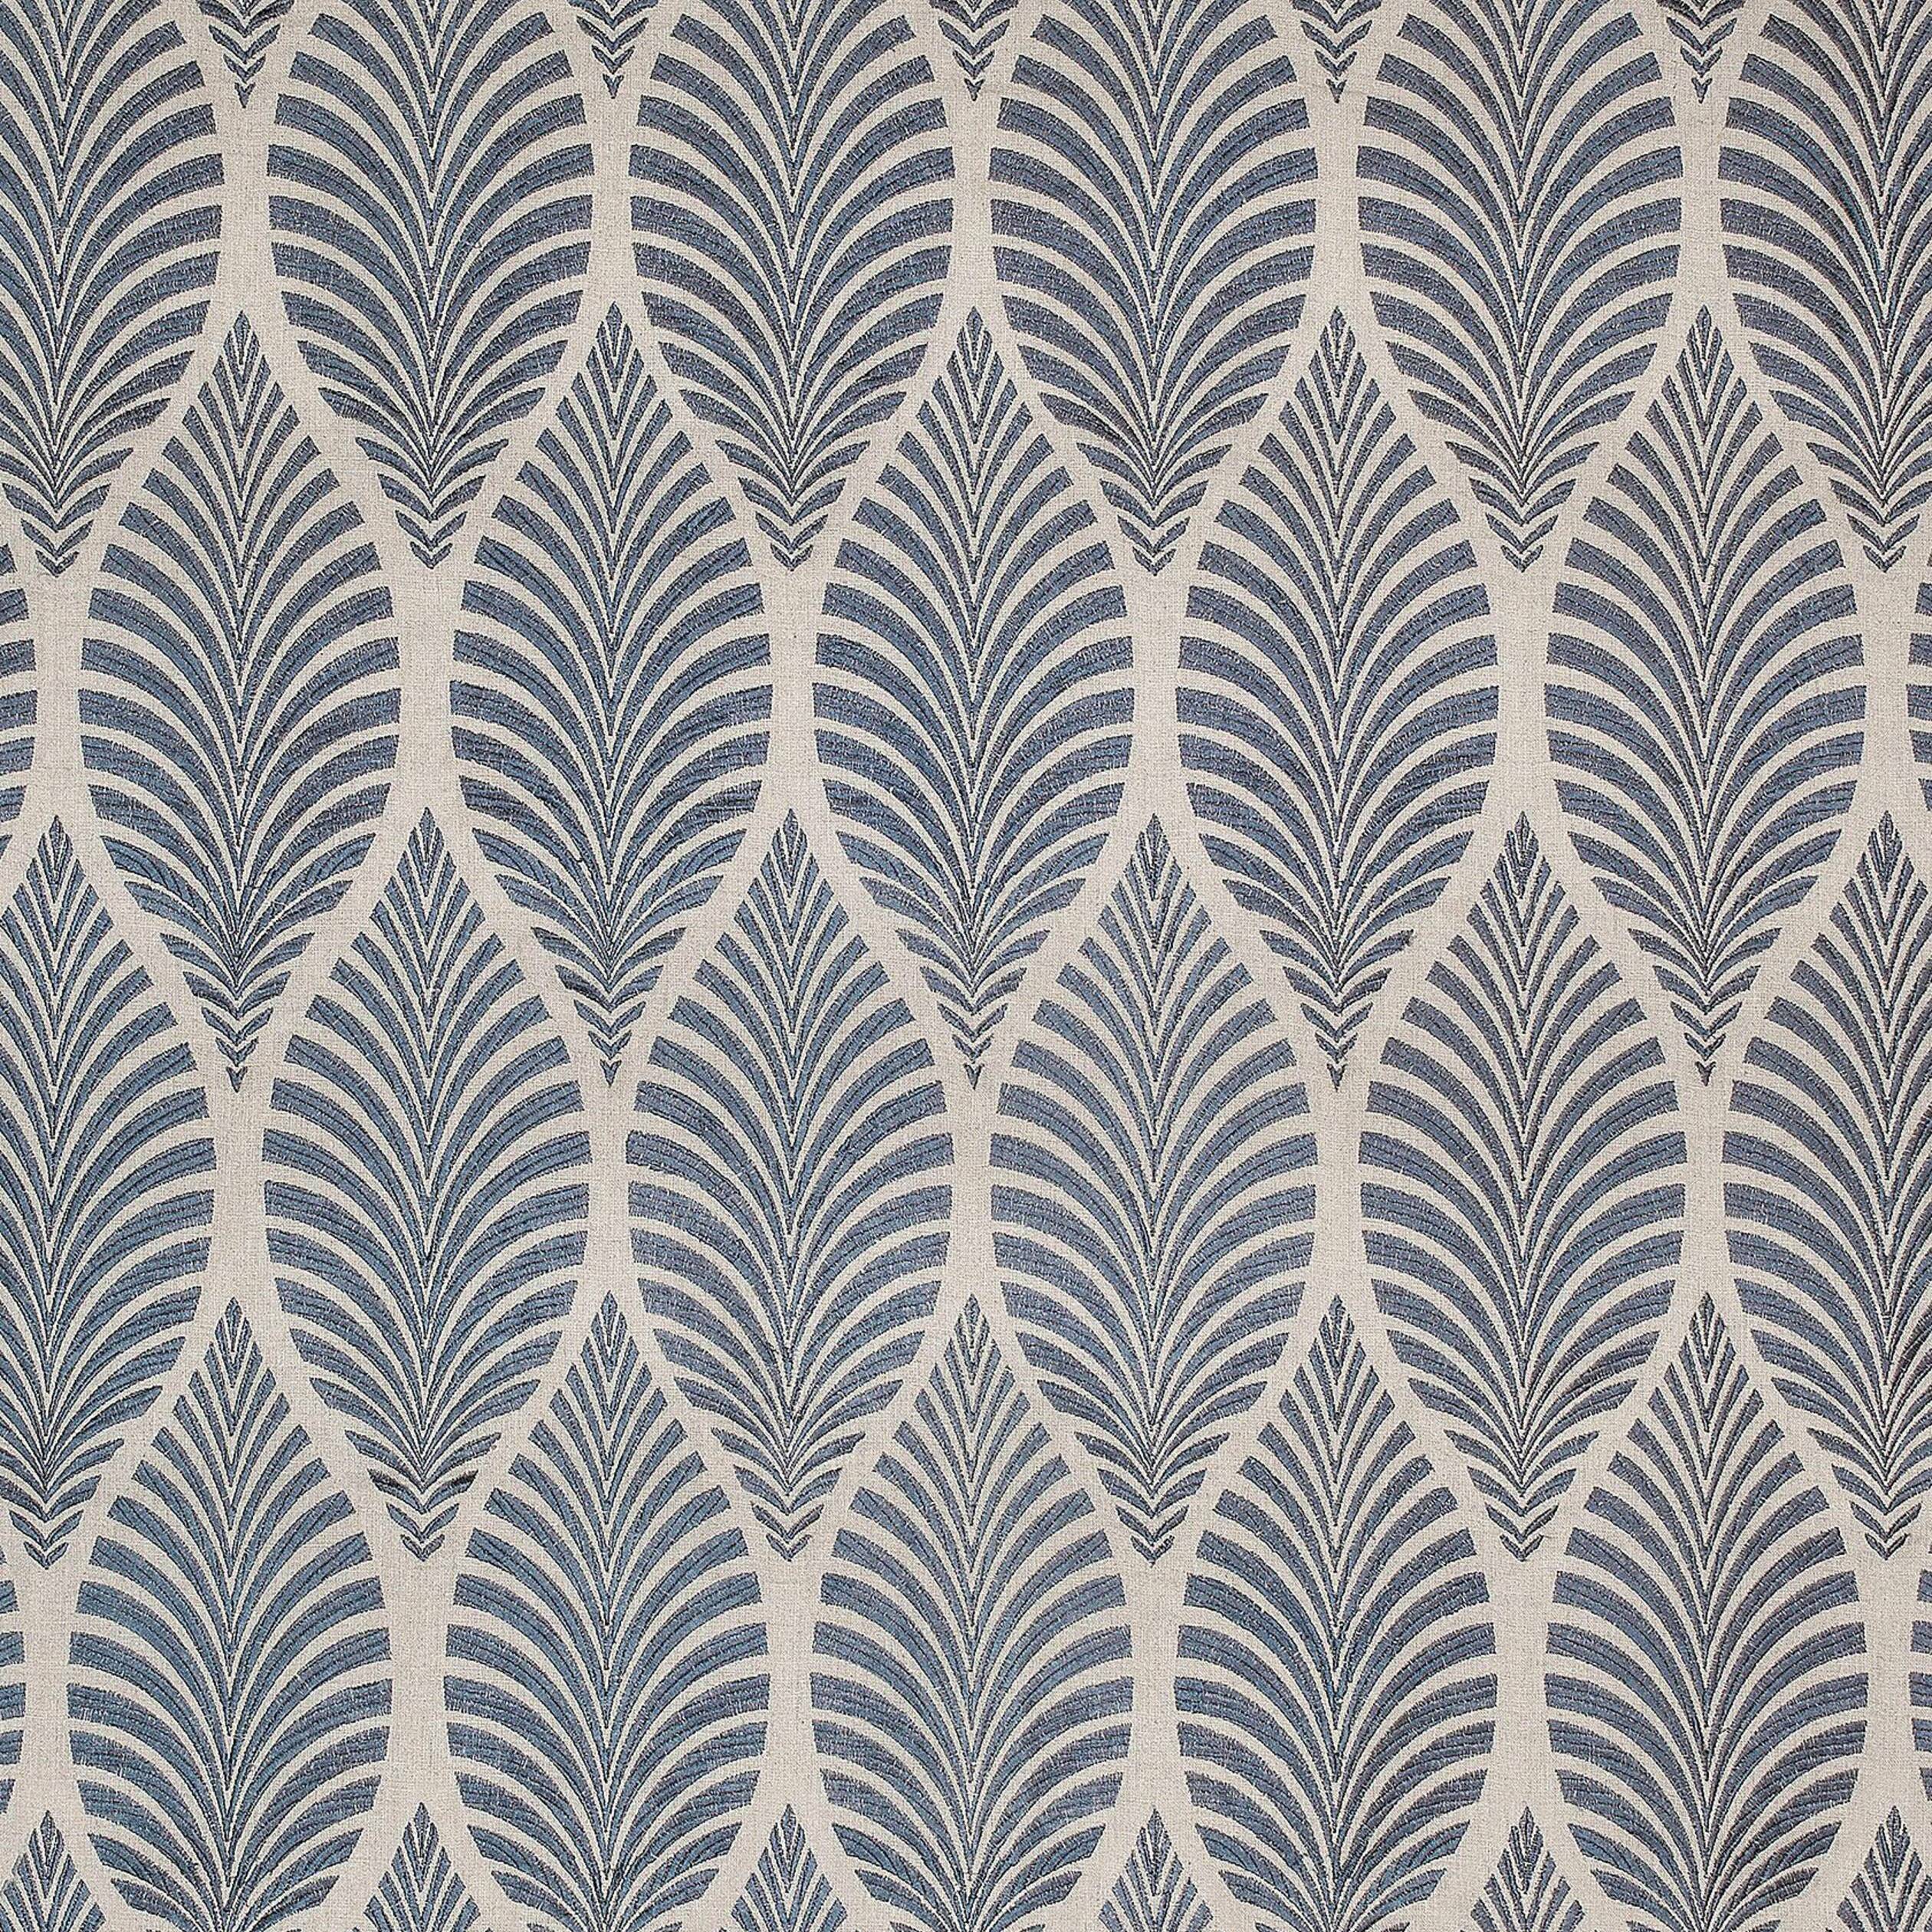 PLUMES, Metallic Silver, AT7926, Collection Watermark from Anna French